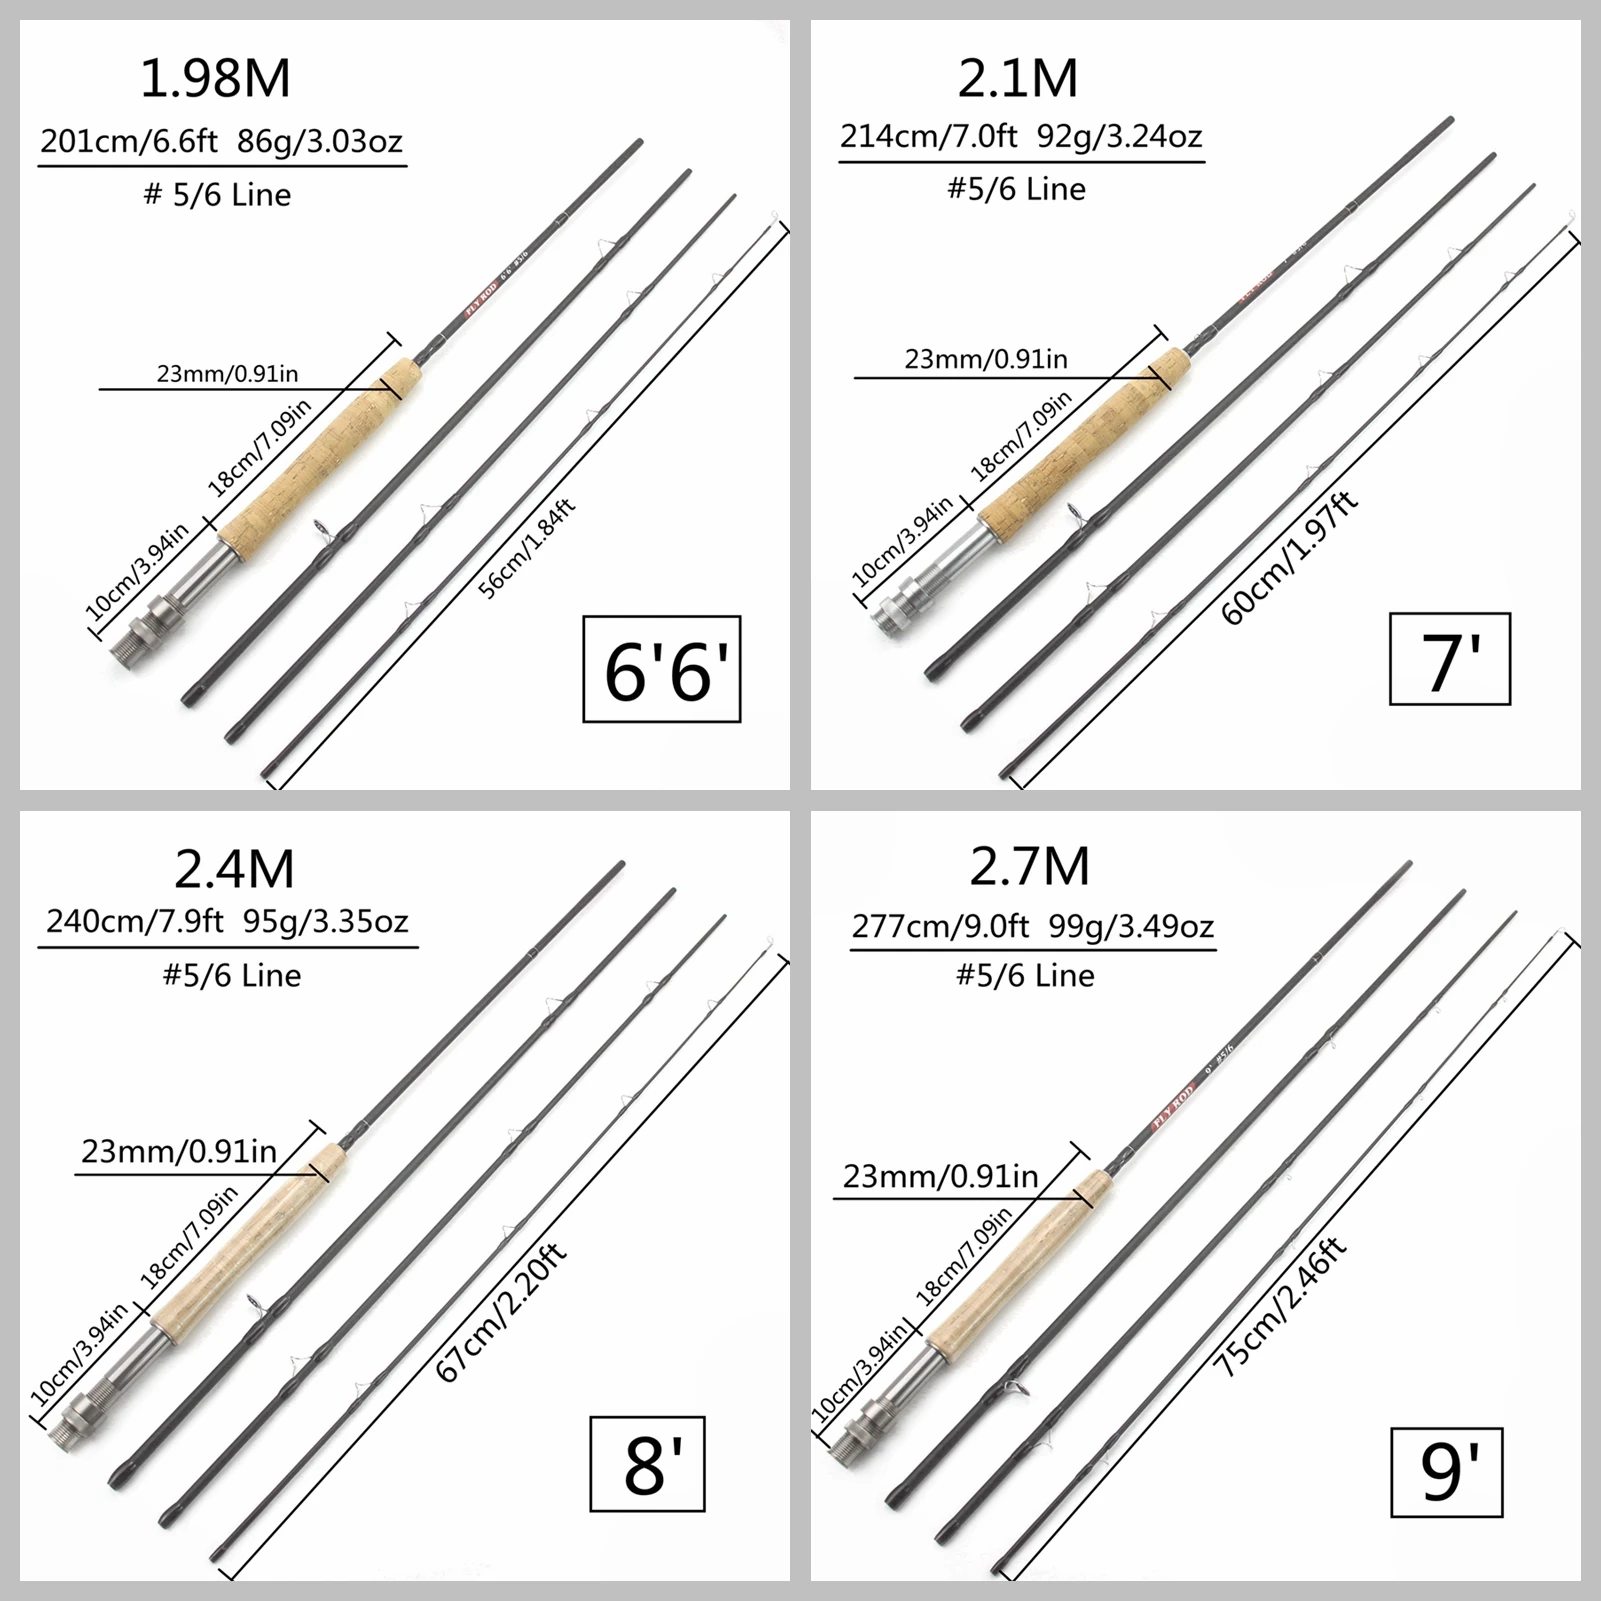 2.1M 2.4M 2.7M UltraLight 4 Sections Fly Fishing Rods LW 5/6 Fast